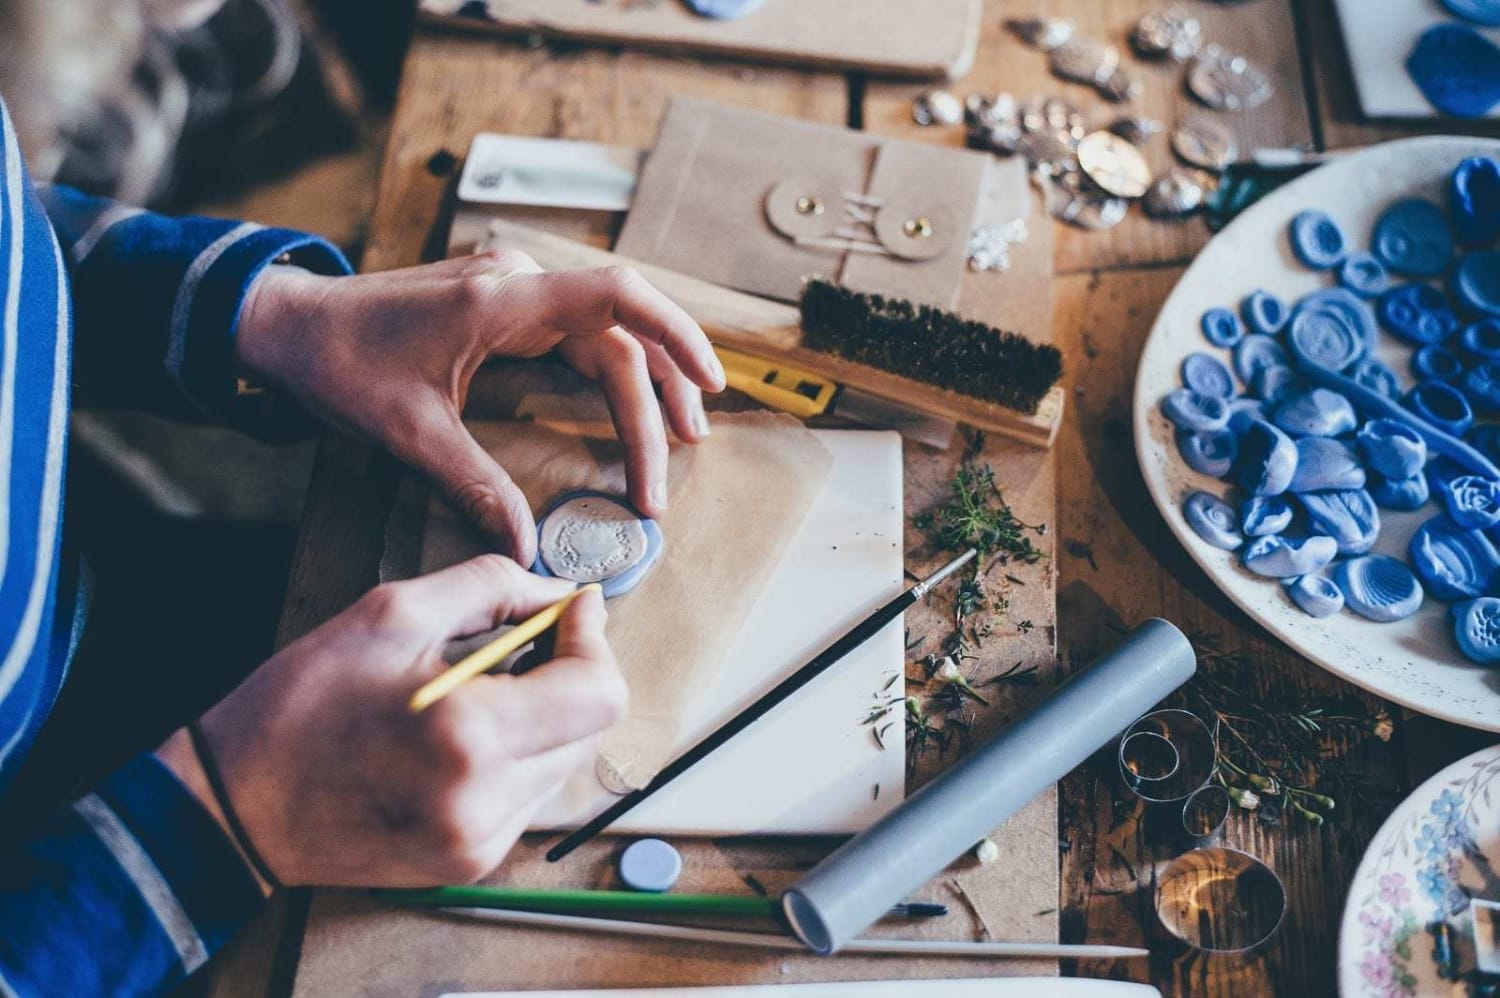 Calling All Crafters: You Need These Things In 2019